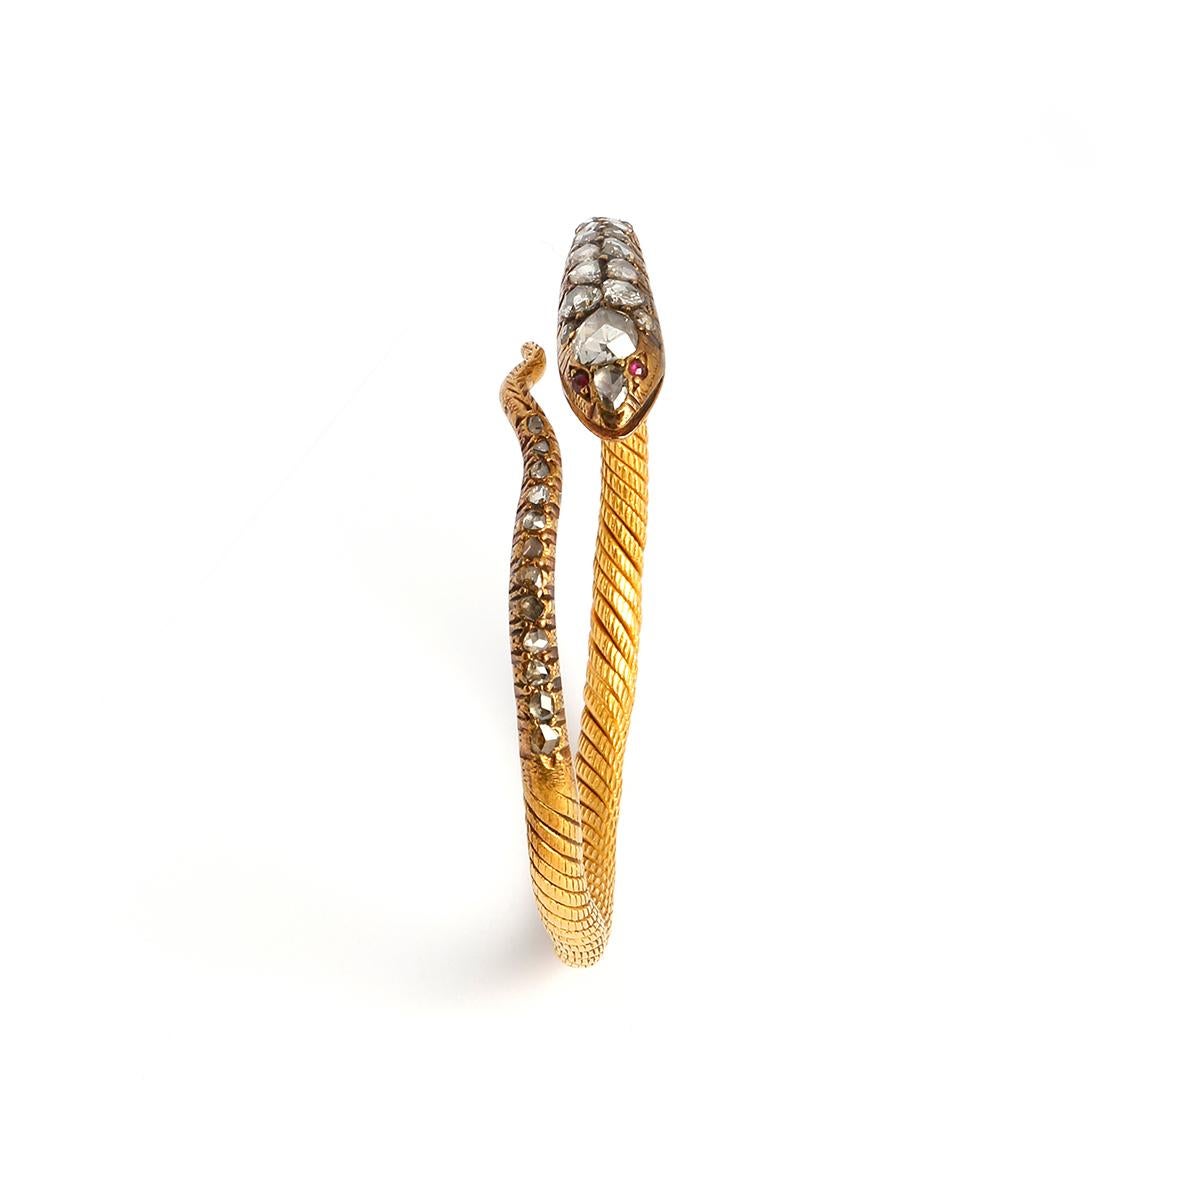 Bracelet Snake set by rose cut diamond. 
Total 3.50 carats on twisted yellow gold.

Rose cut Diamond size: 0,24x0,28 inch (0.6x0.7 centimeters).
Height 0,08 inch (0.2 centimeters).
Head's length: 1.57 inch (4.00 centimeters).
Size: 6 1/4 inches